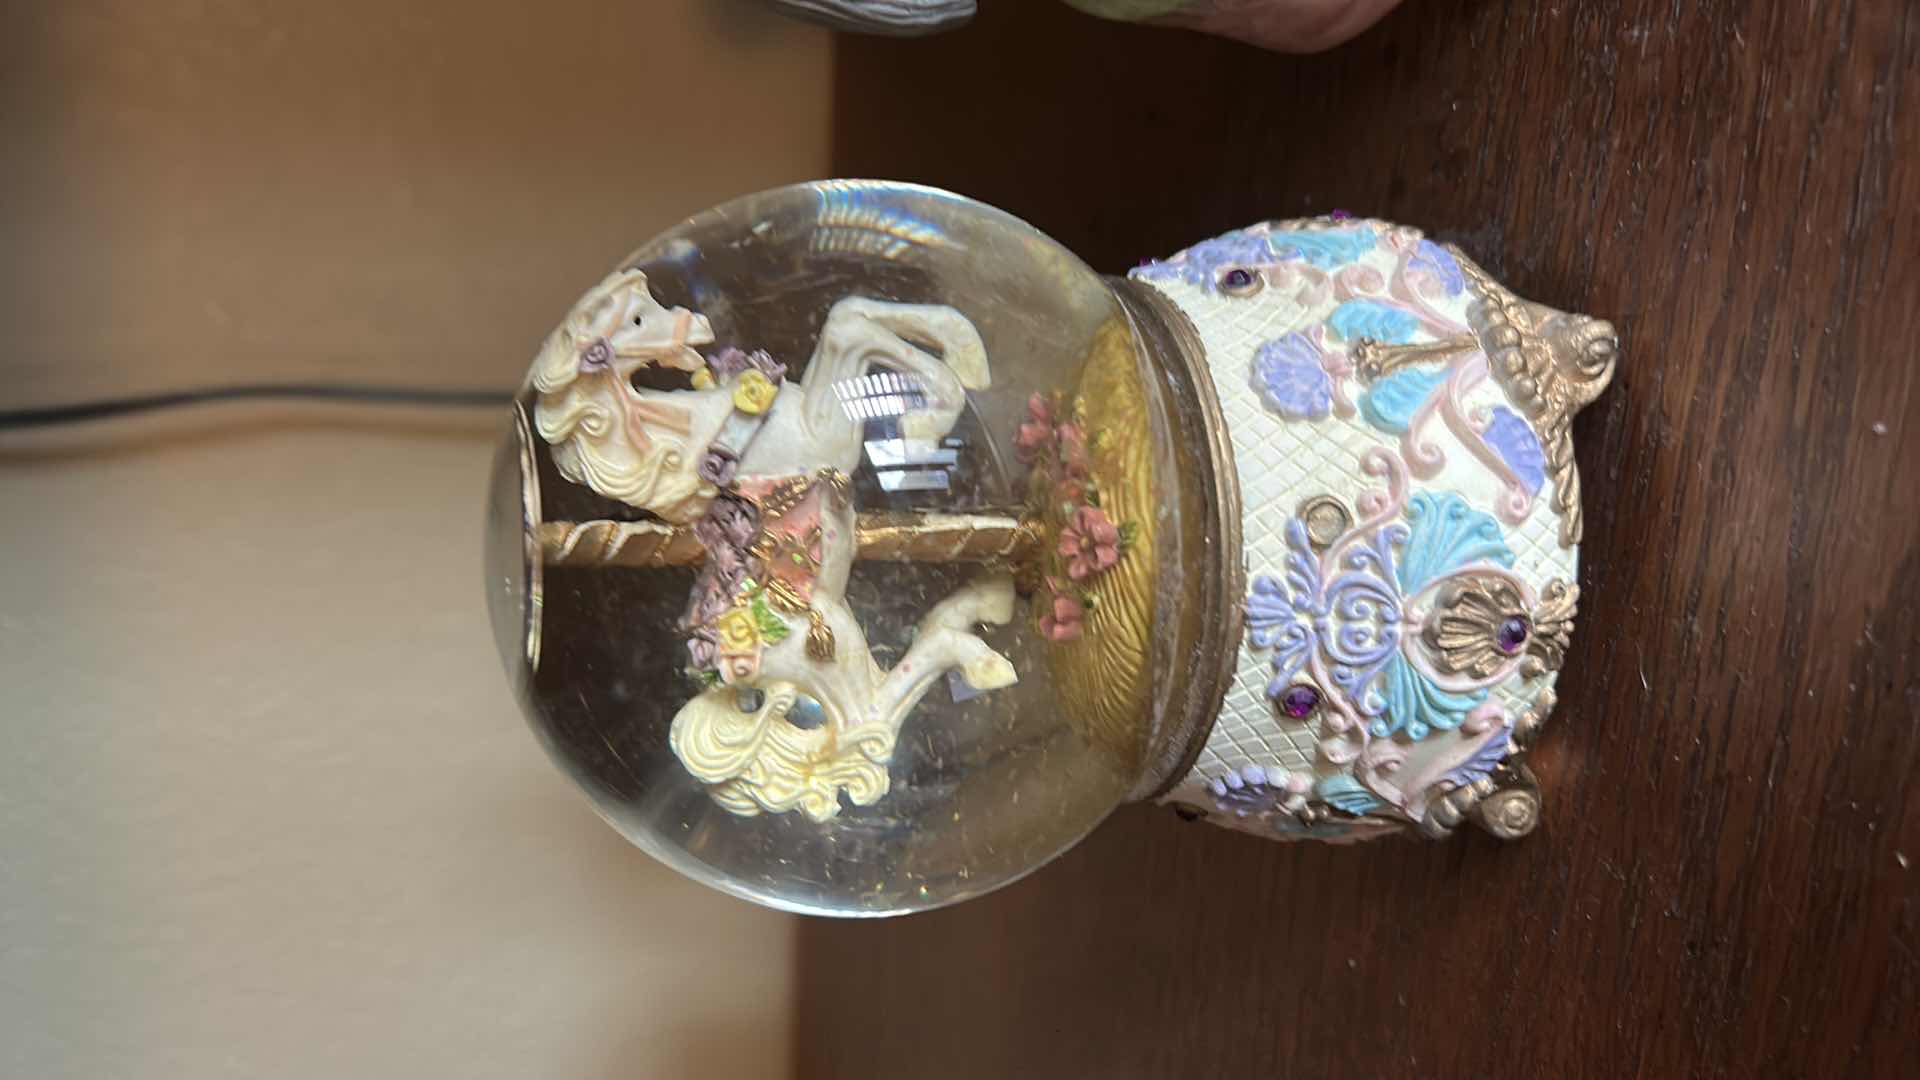 Photo 2 of 3 MUSIC BOXES AND SNOW GLOBES